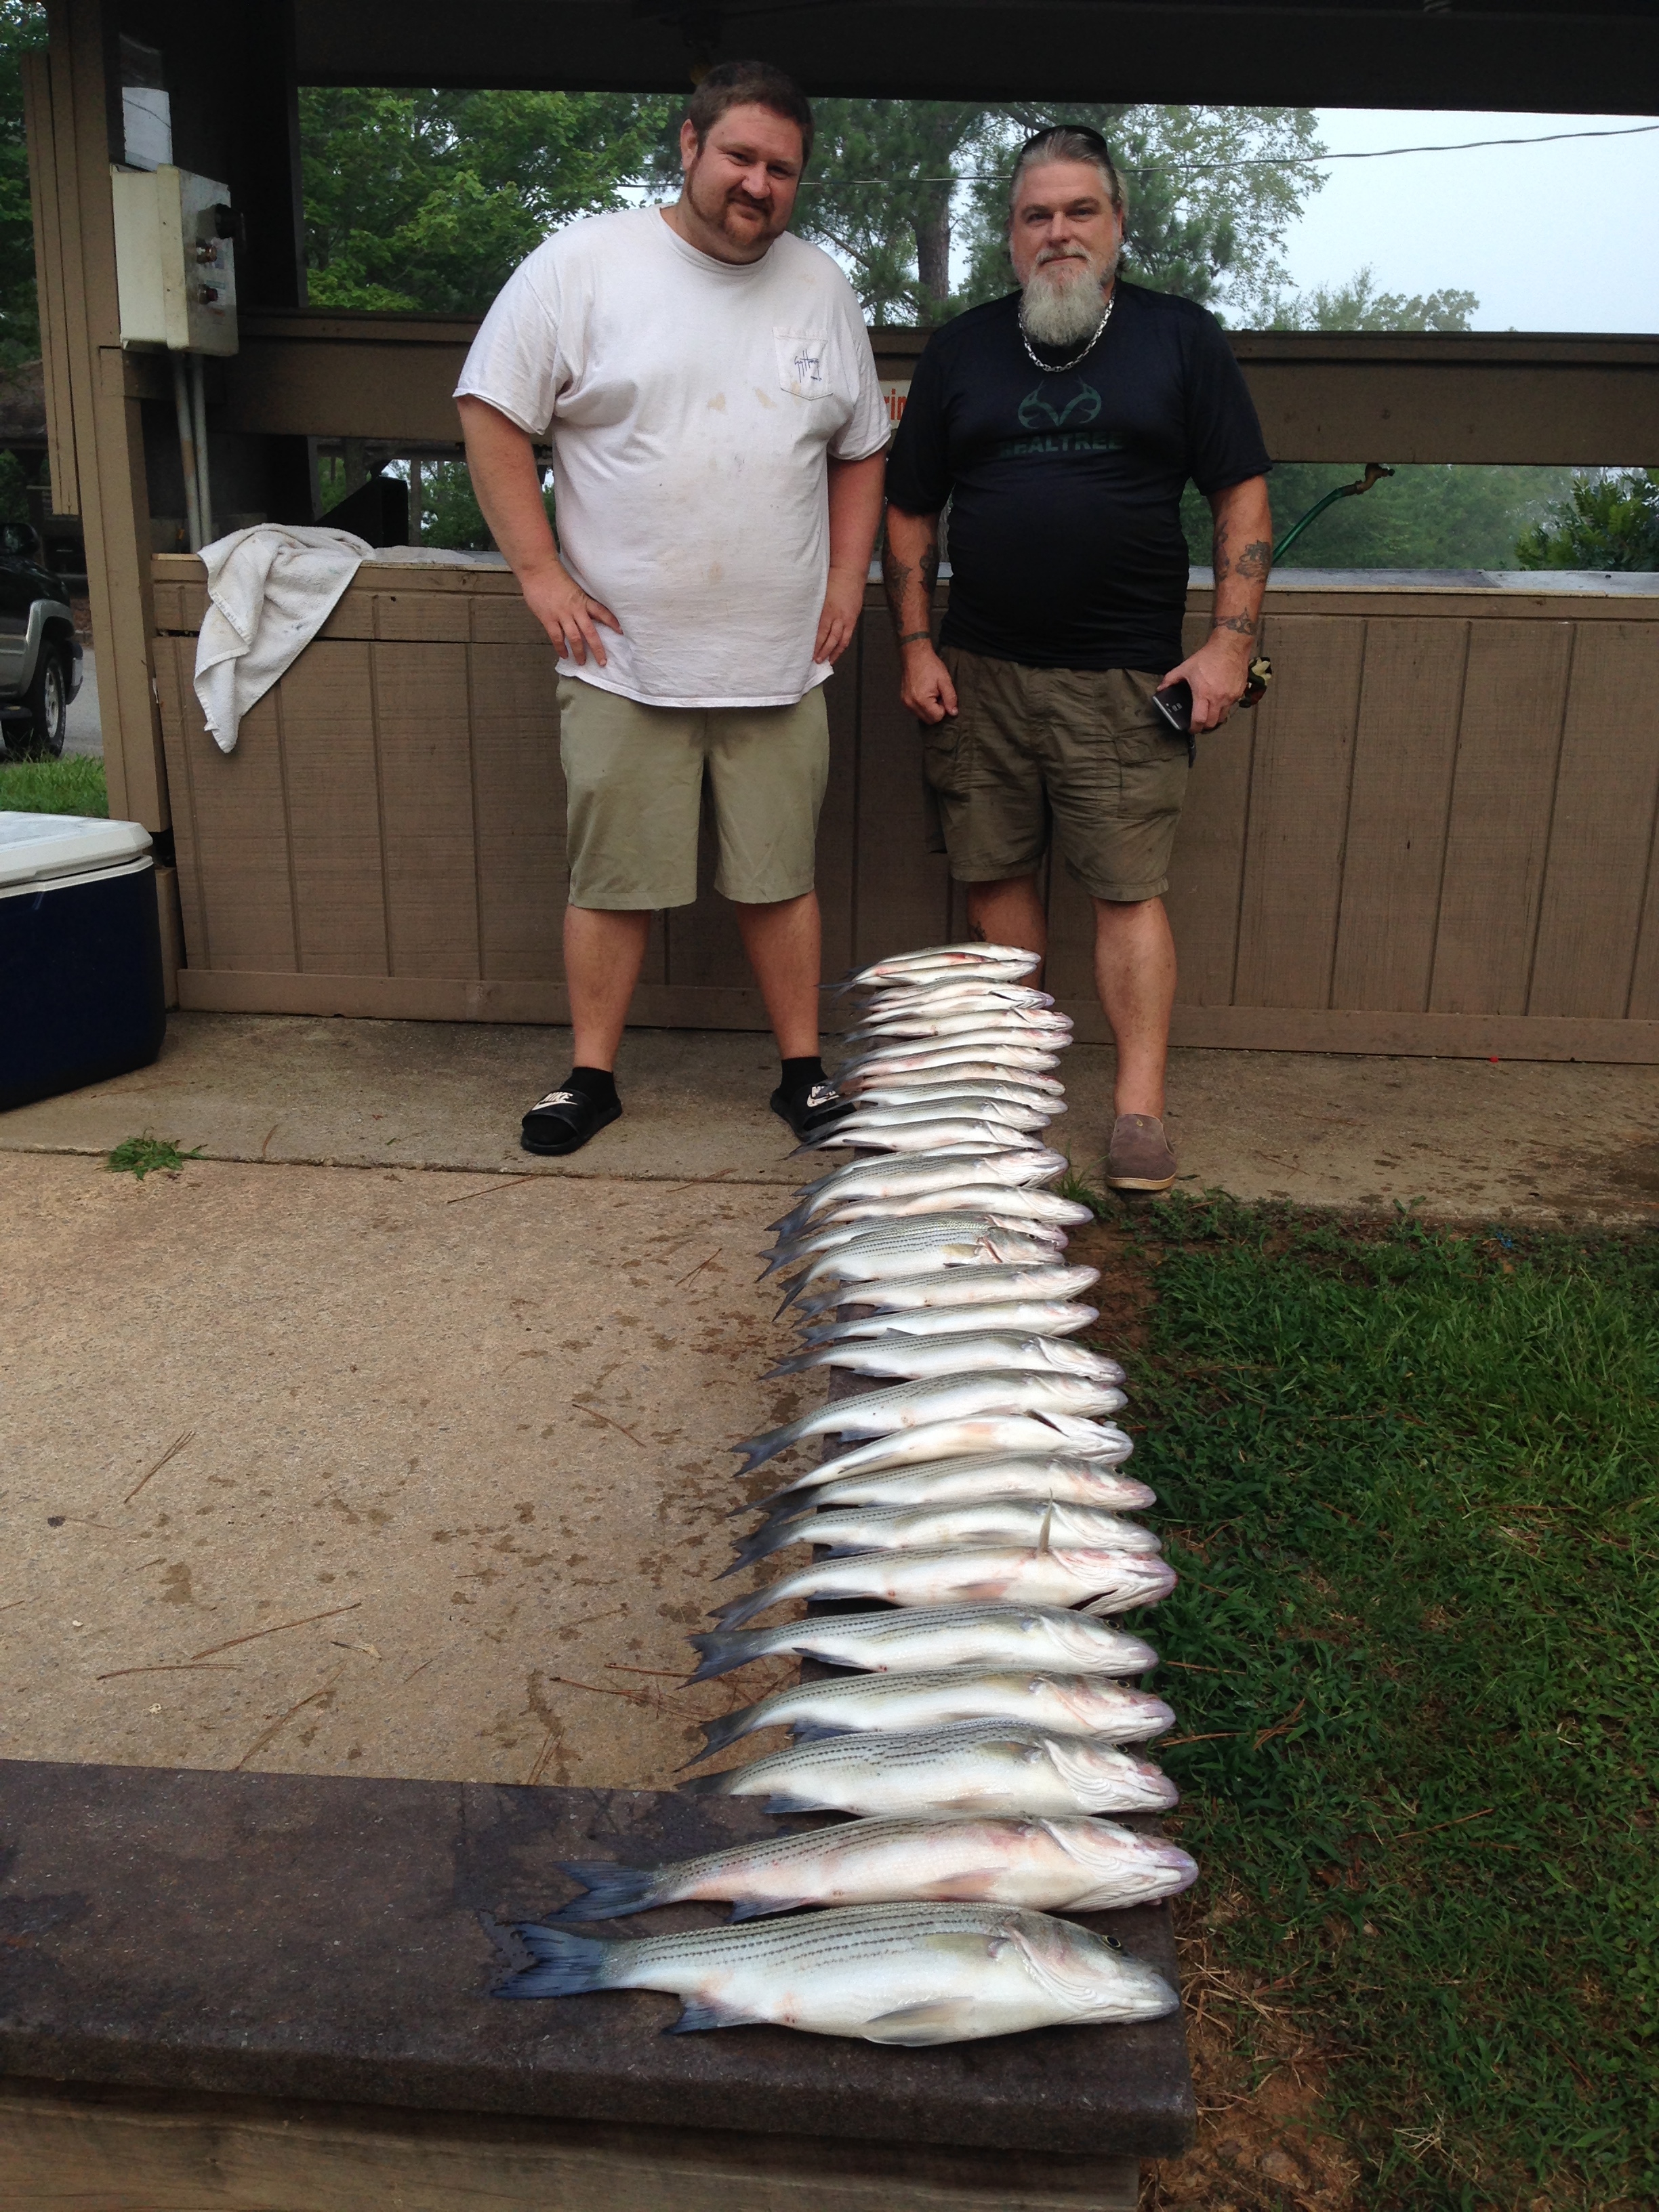 July 3, 2017Cletus Stamper and Steven Guinn from Washington, Ga with their limit of stripers and hybrids.